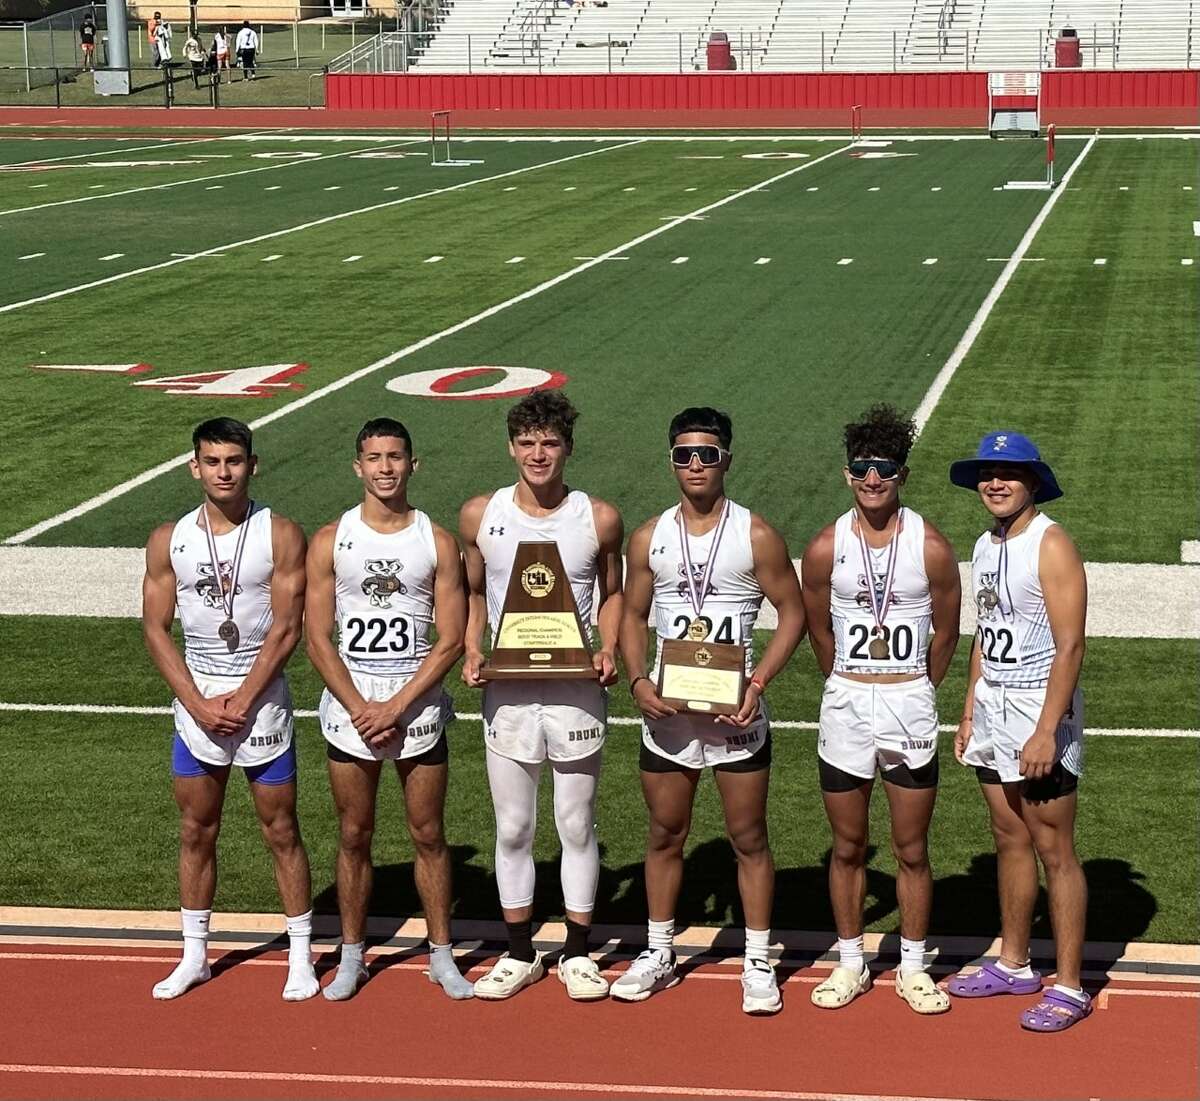 The Bruni track and field team is heading to the state meet after winning the first Region IV-2A Track and Field Championship in program history.